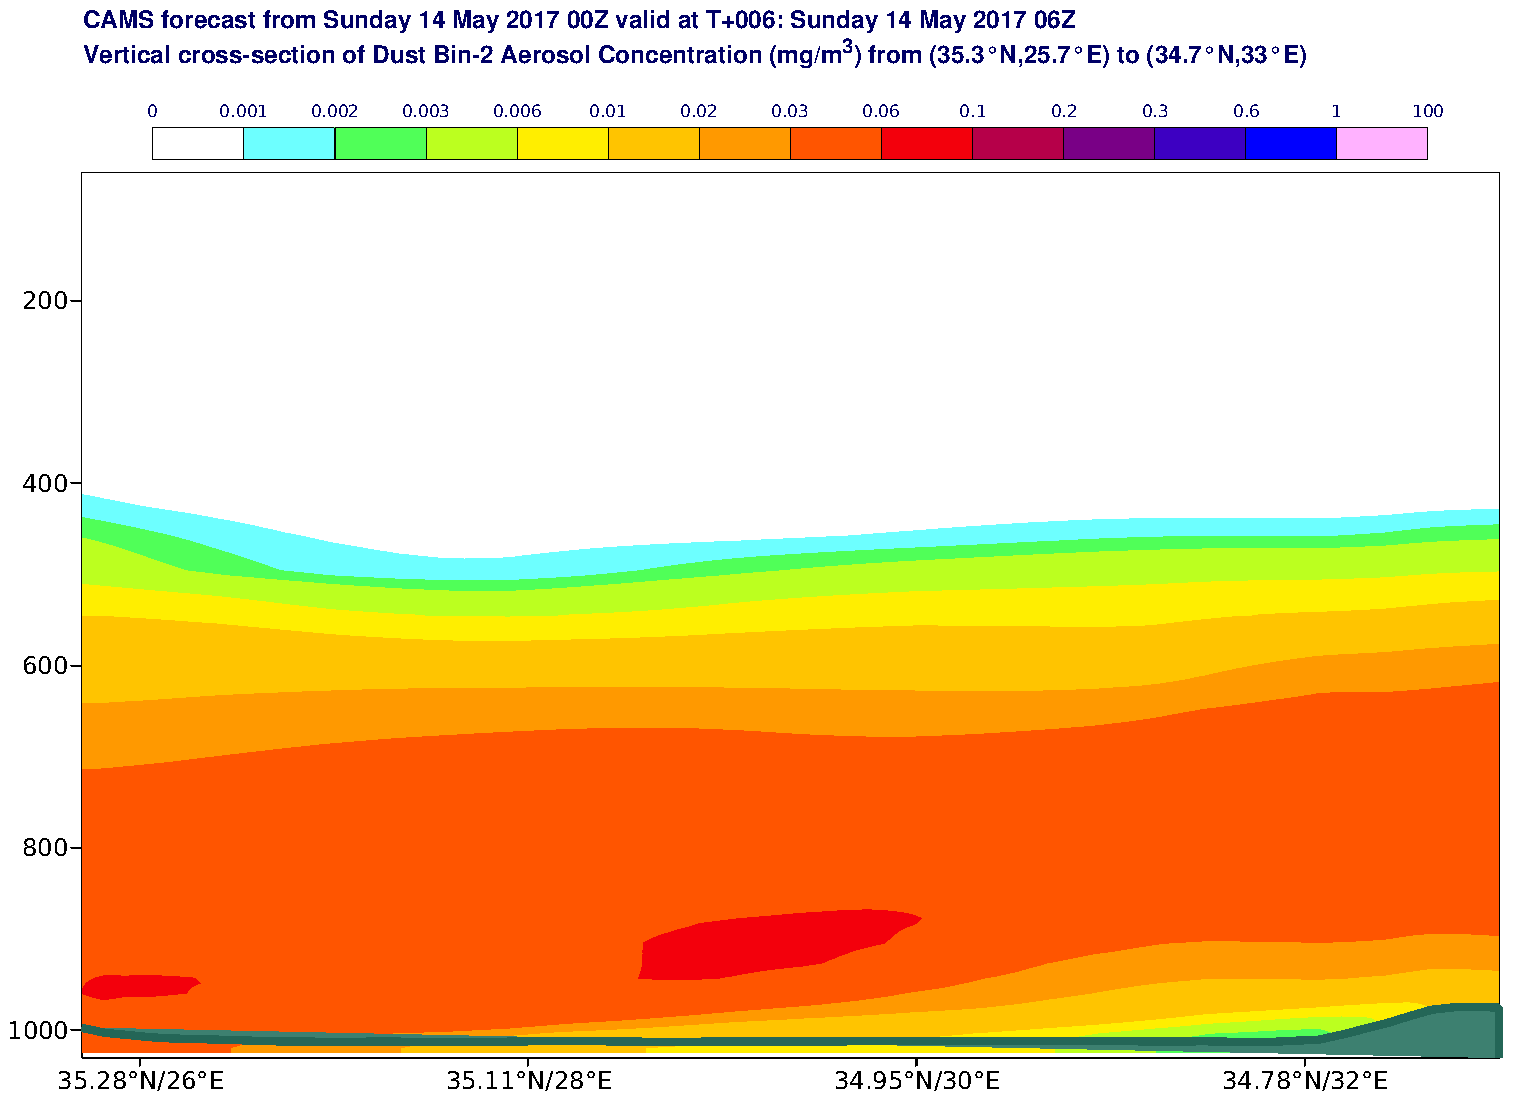 Vertical cross-section of Dust Bin-2 Aerosol Concentration (mg/m3) valid at T6 - 2017-05-14 06:00